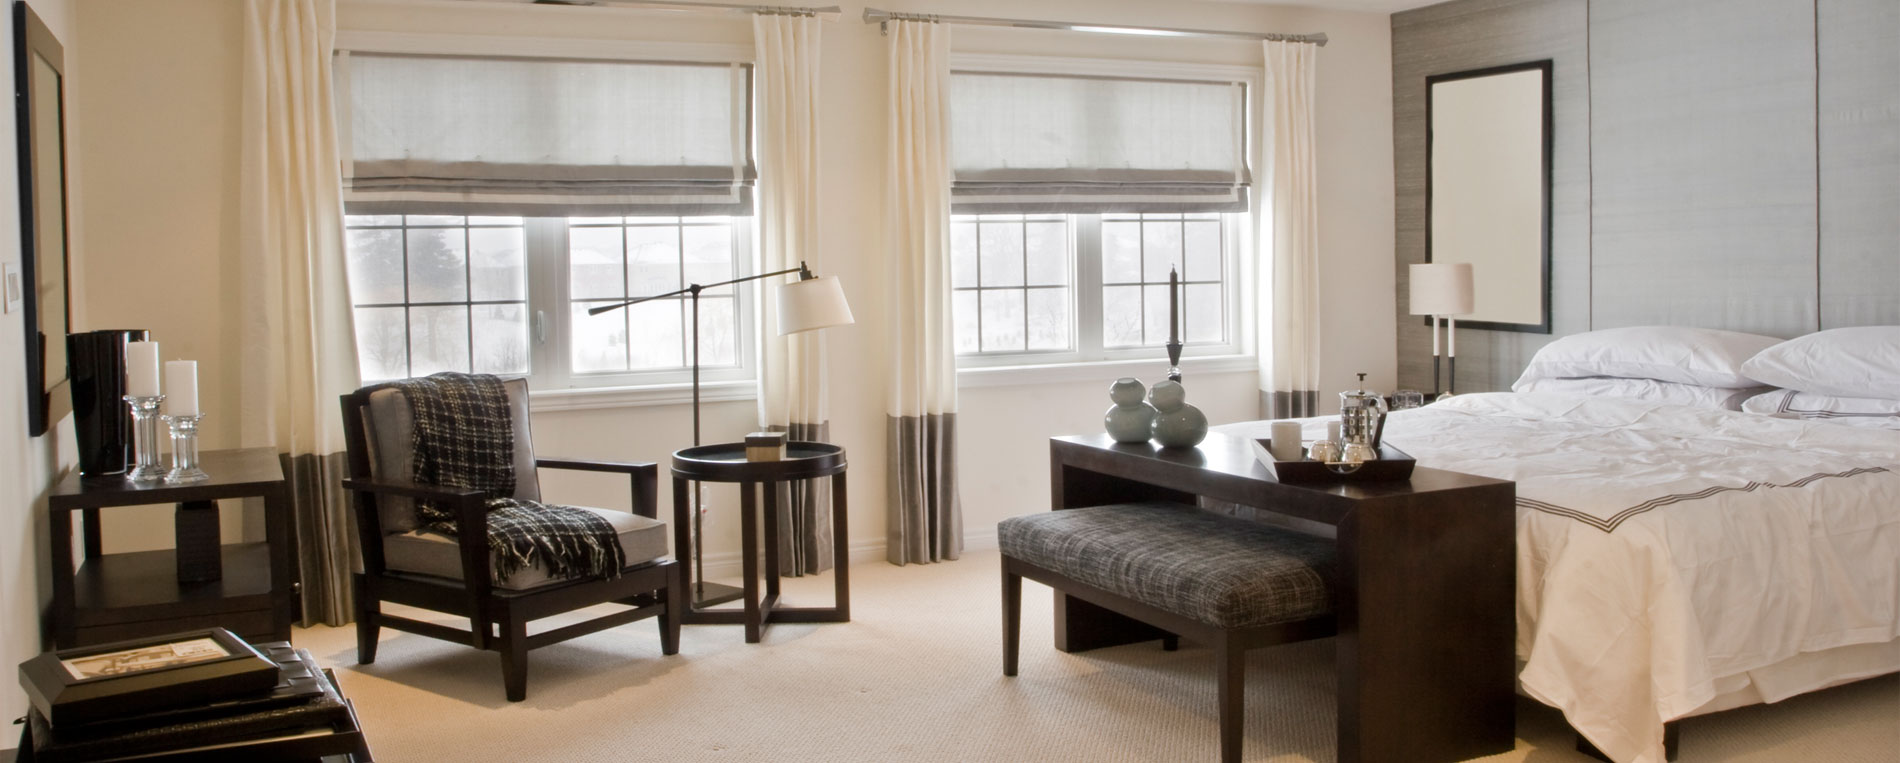 Choosing The Right Blinds For Your Home